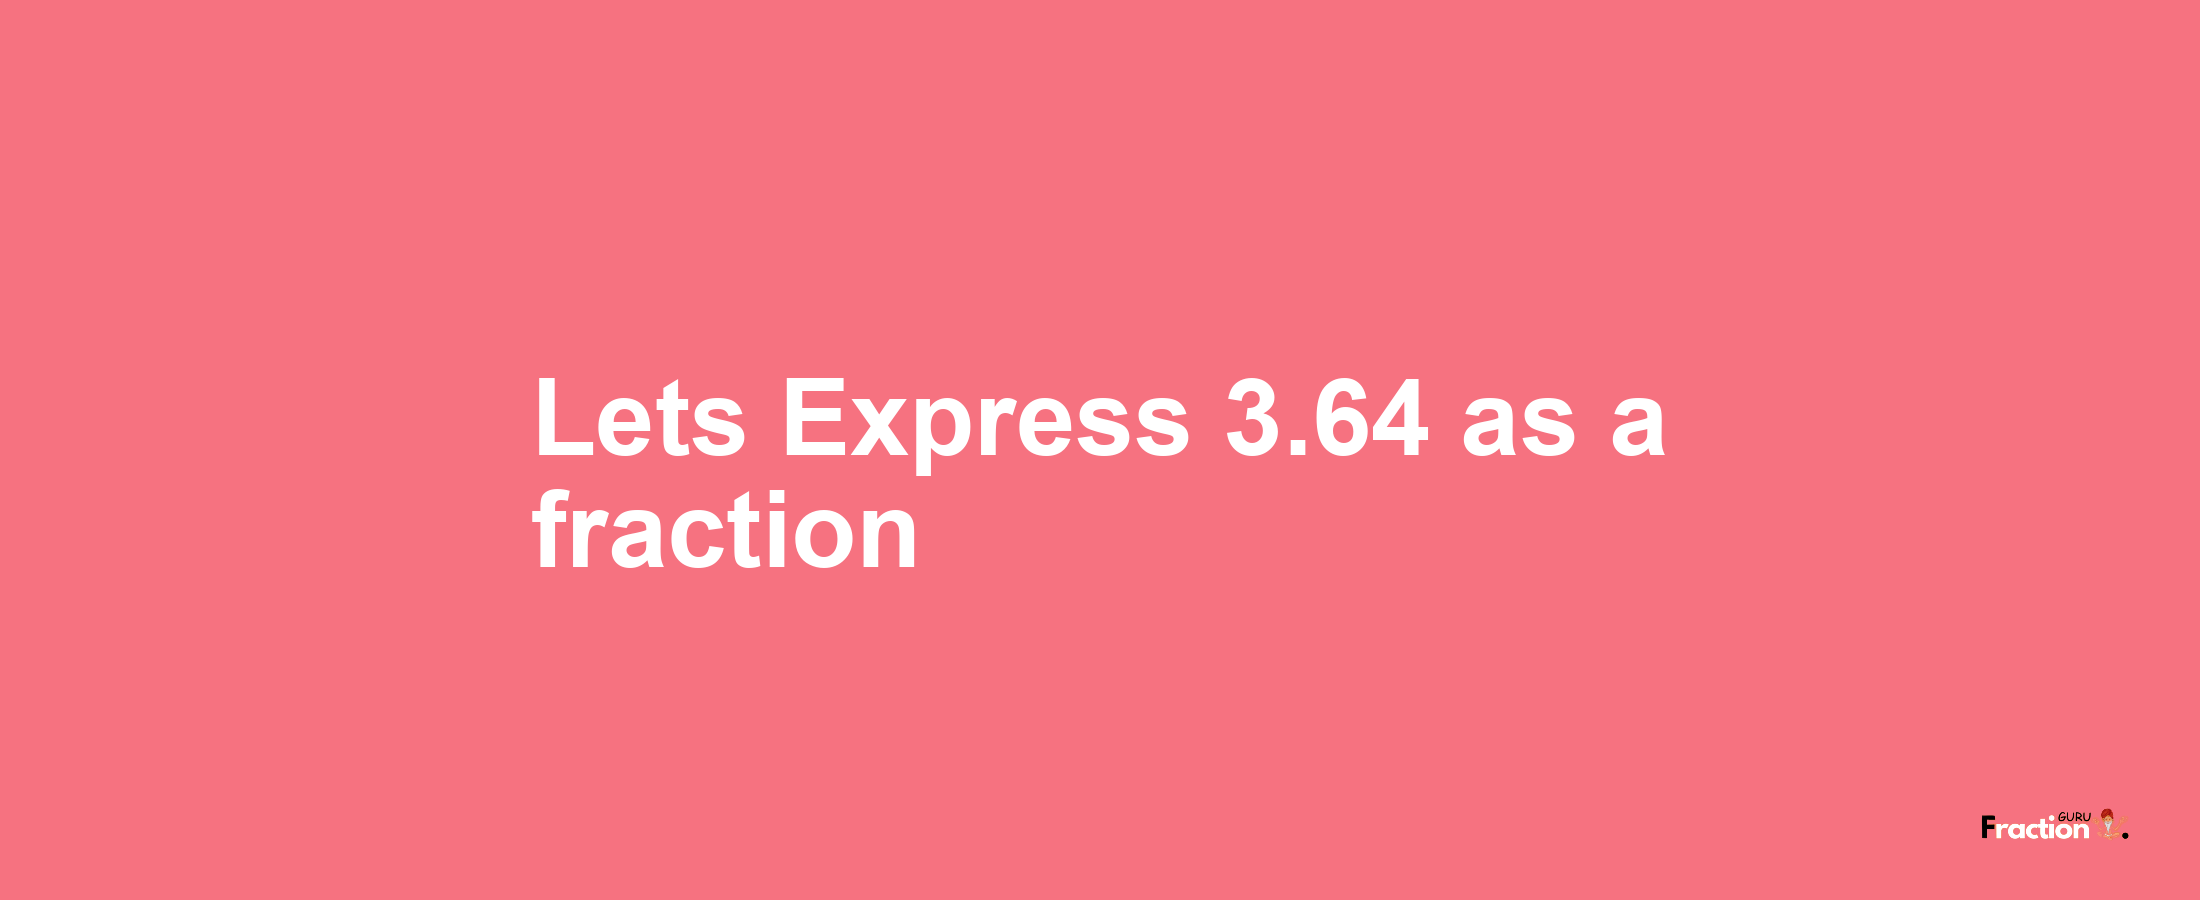 Lets Express 3.64 as afraction